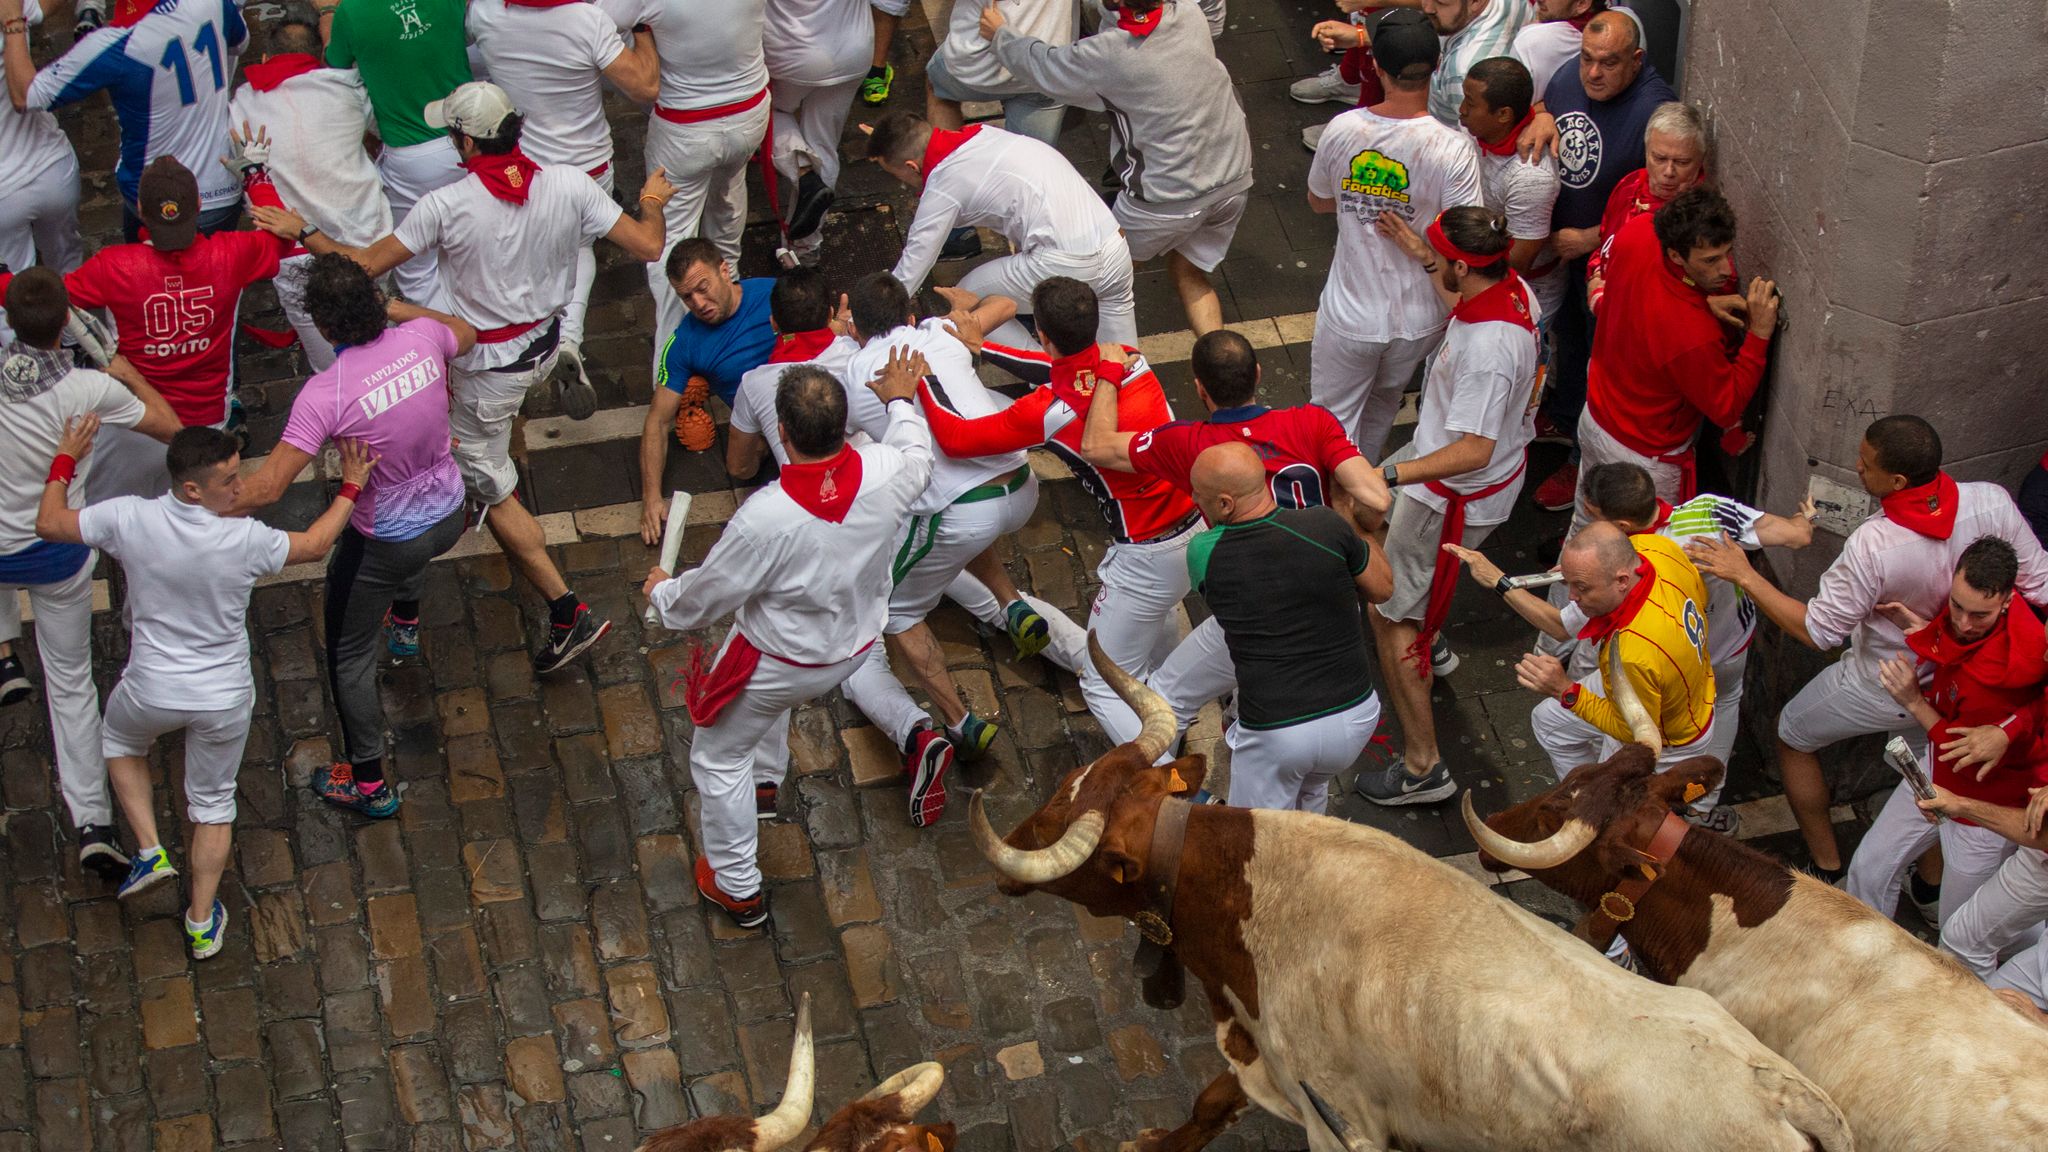 Man gored and four badly injured on first day of Pamplona bull run